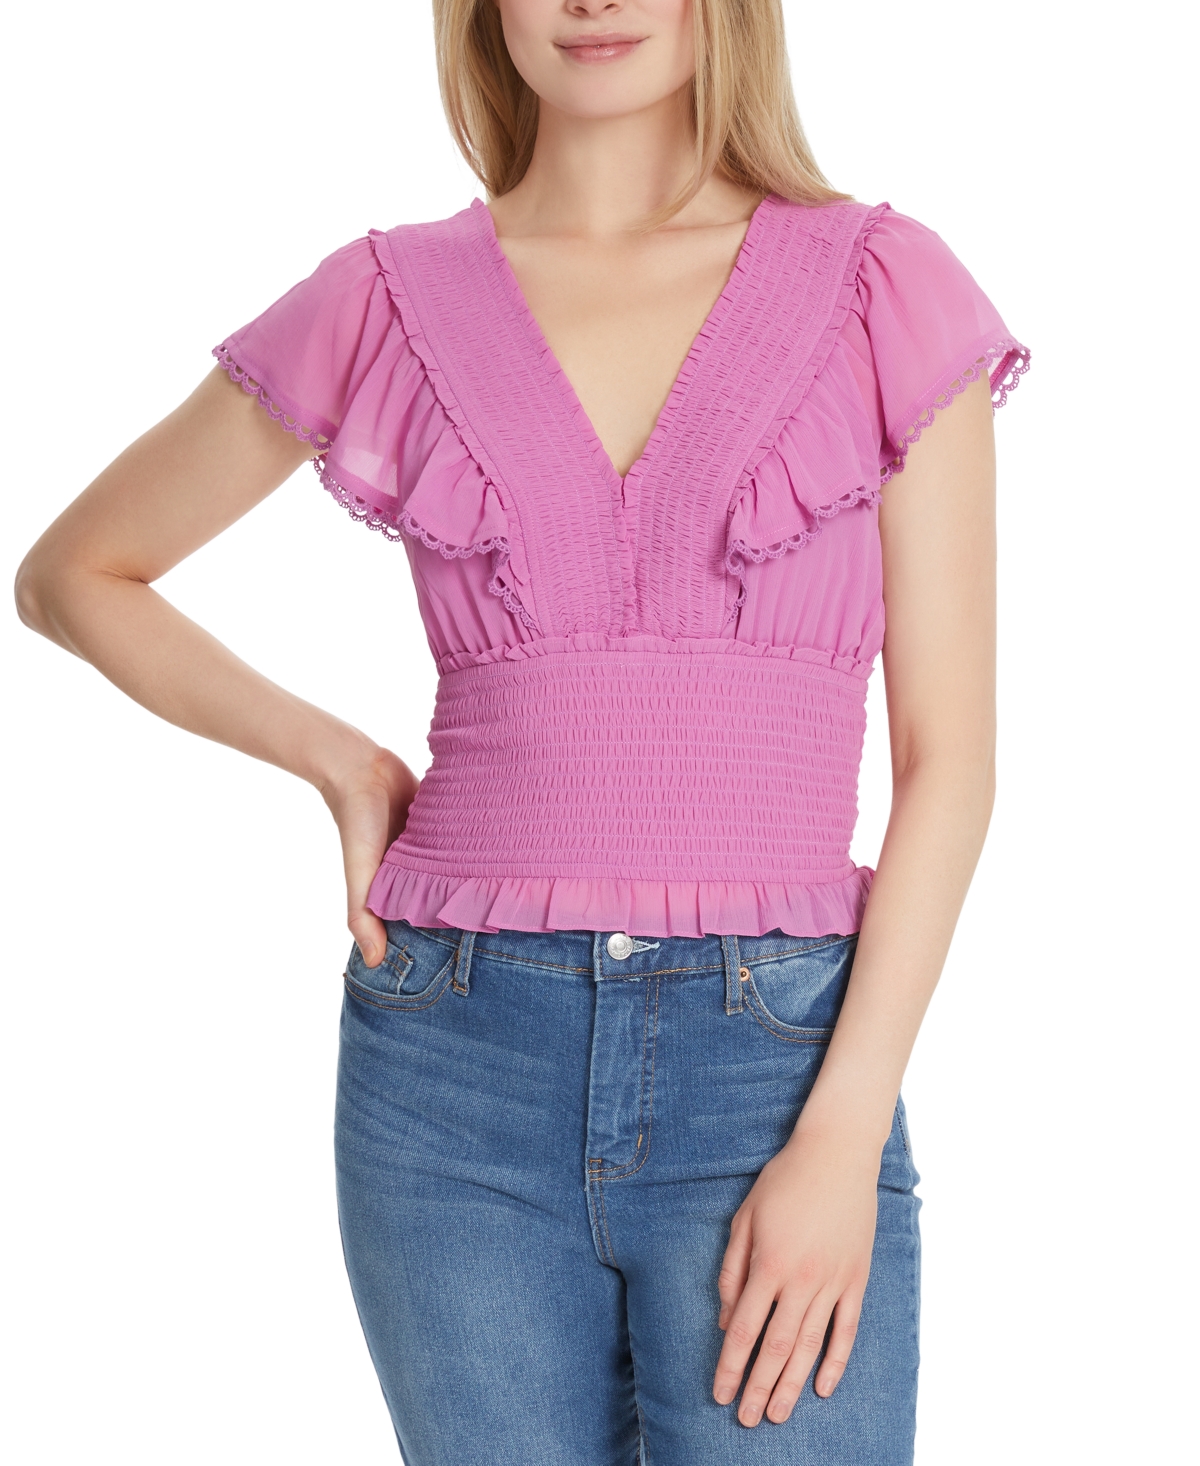 Women's Lilianna Smocked Ruffled Top - RADIANT ORCHID